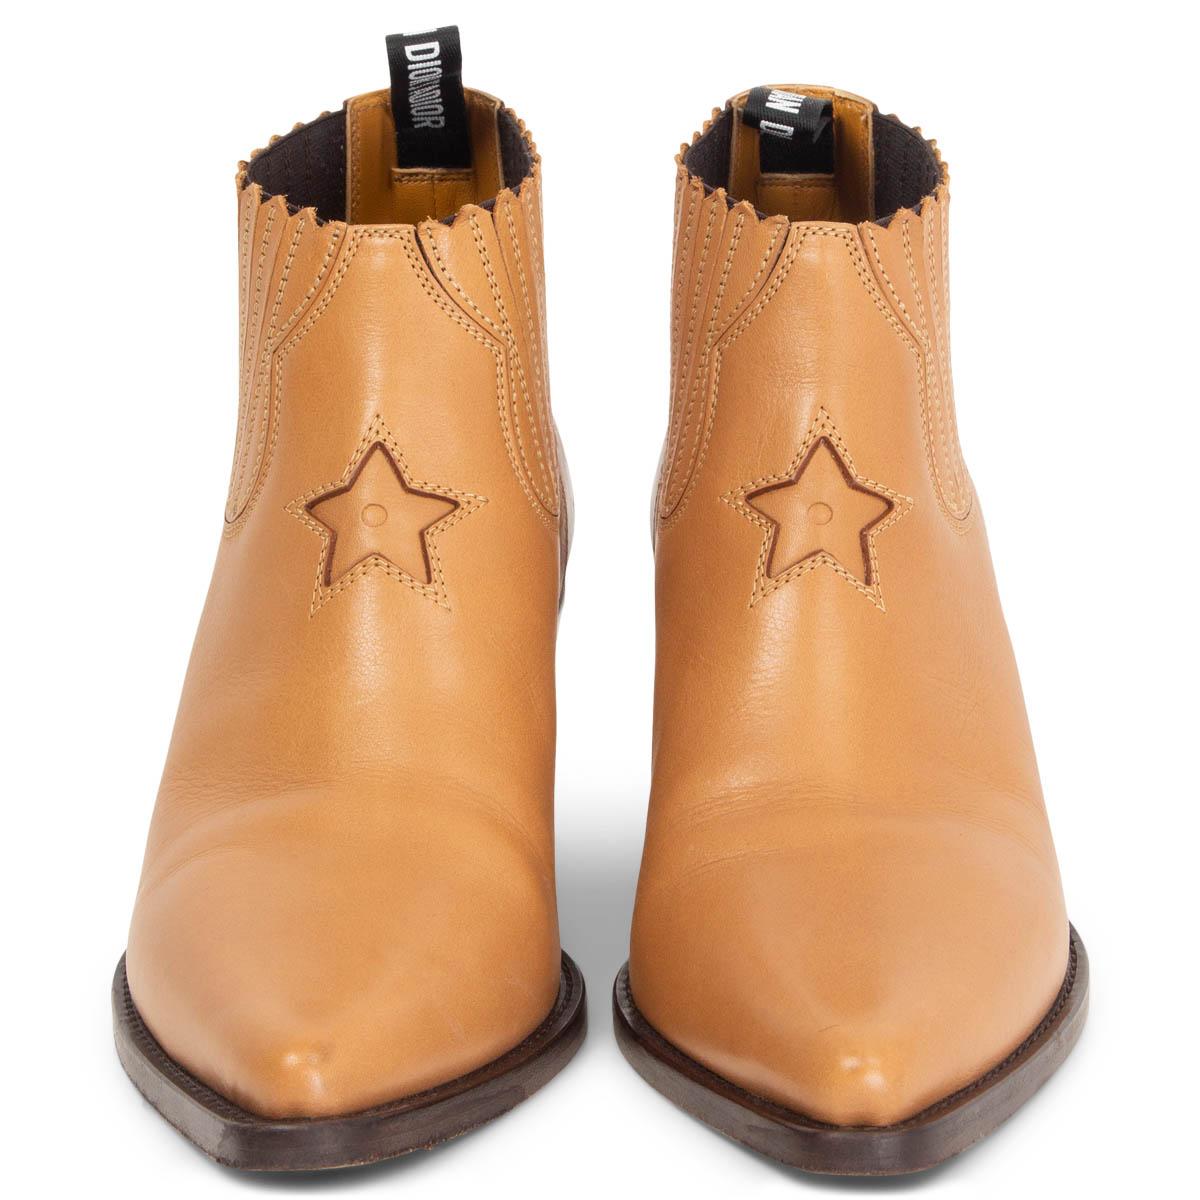 
100% authentic Christian Dior star ankle cowboy boots in beige and calfskin featuring a pointed toe and logo pull tab at the rear with decorative star detail to the front. Elastic inserts on the side. Have been worn and are in excellent condition.